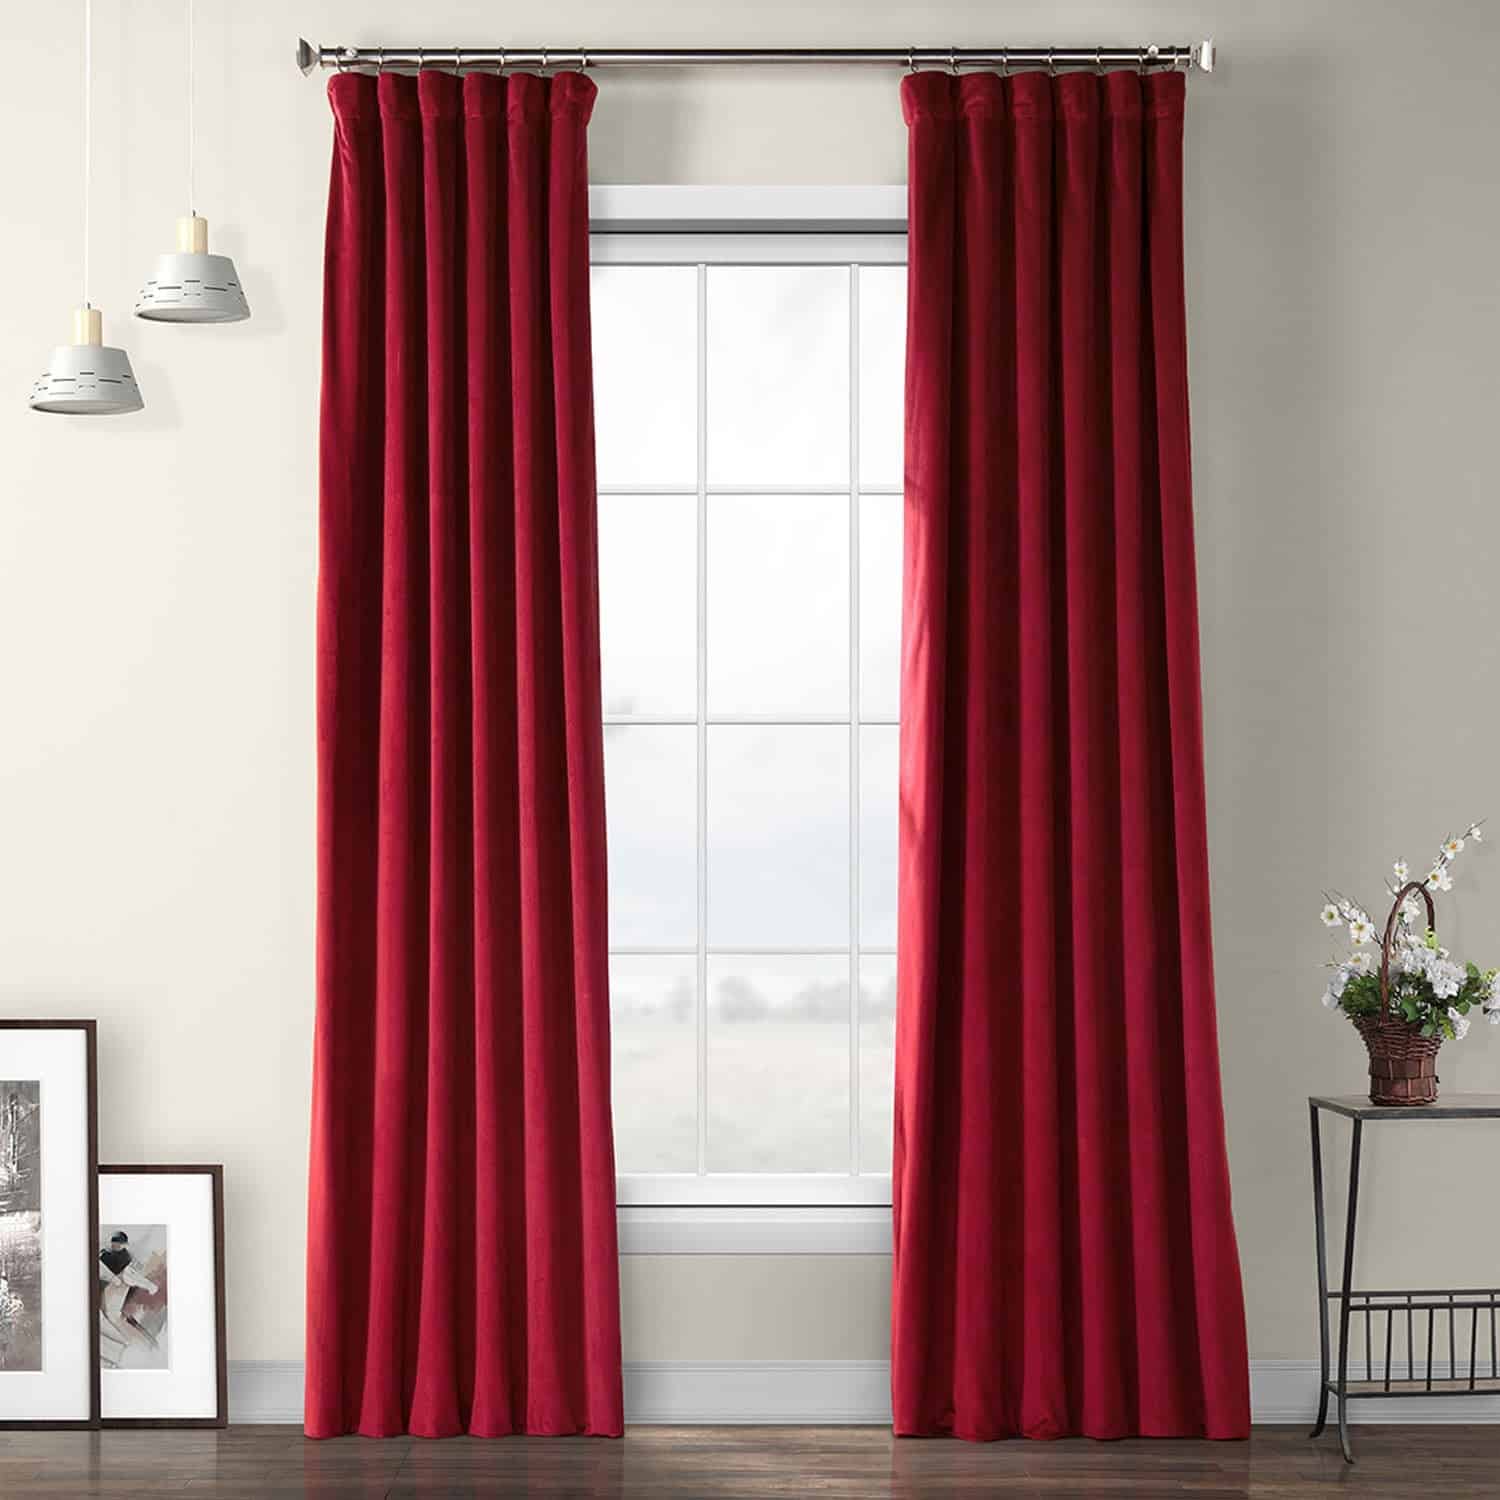 Cinema Red Curtains And Hollywood Chic